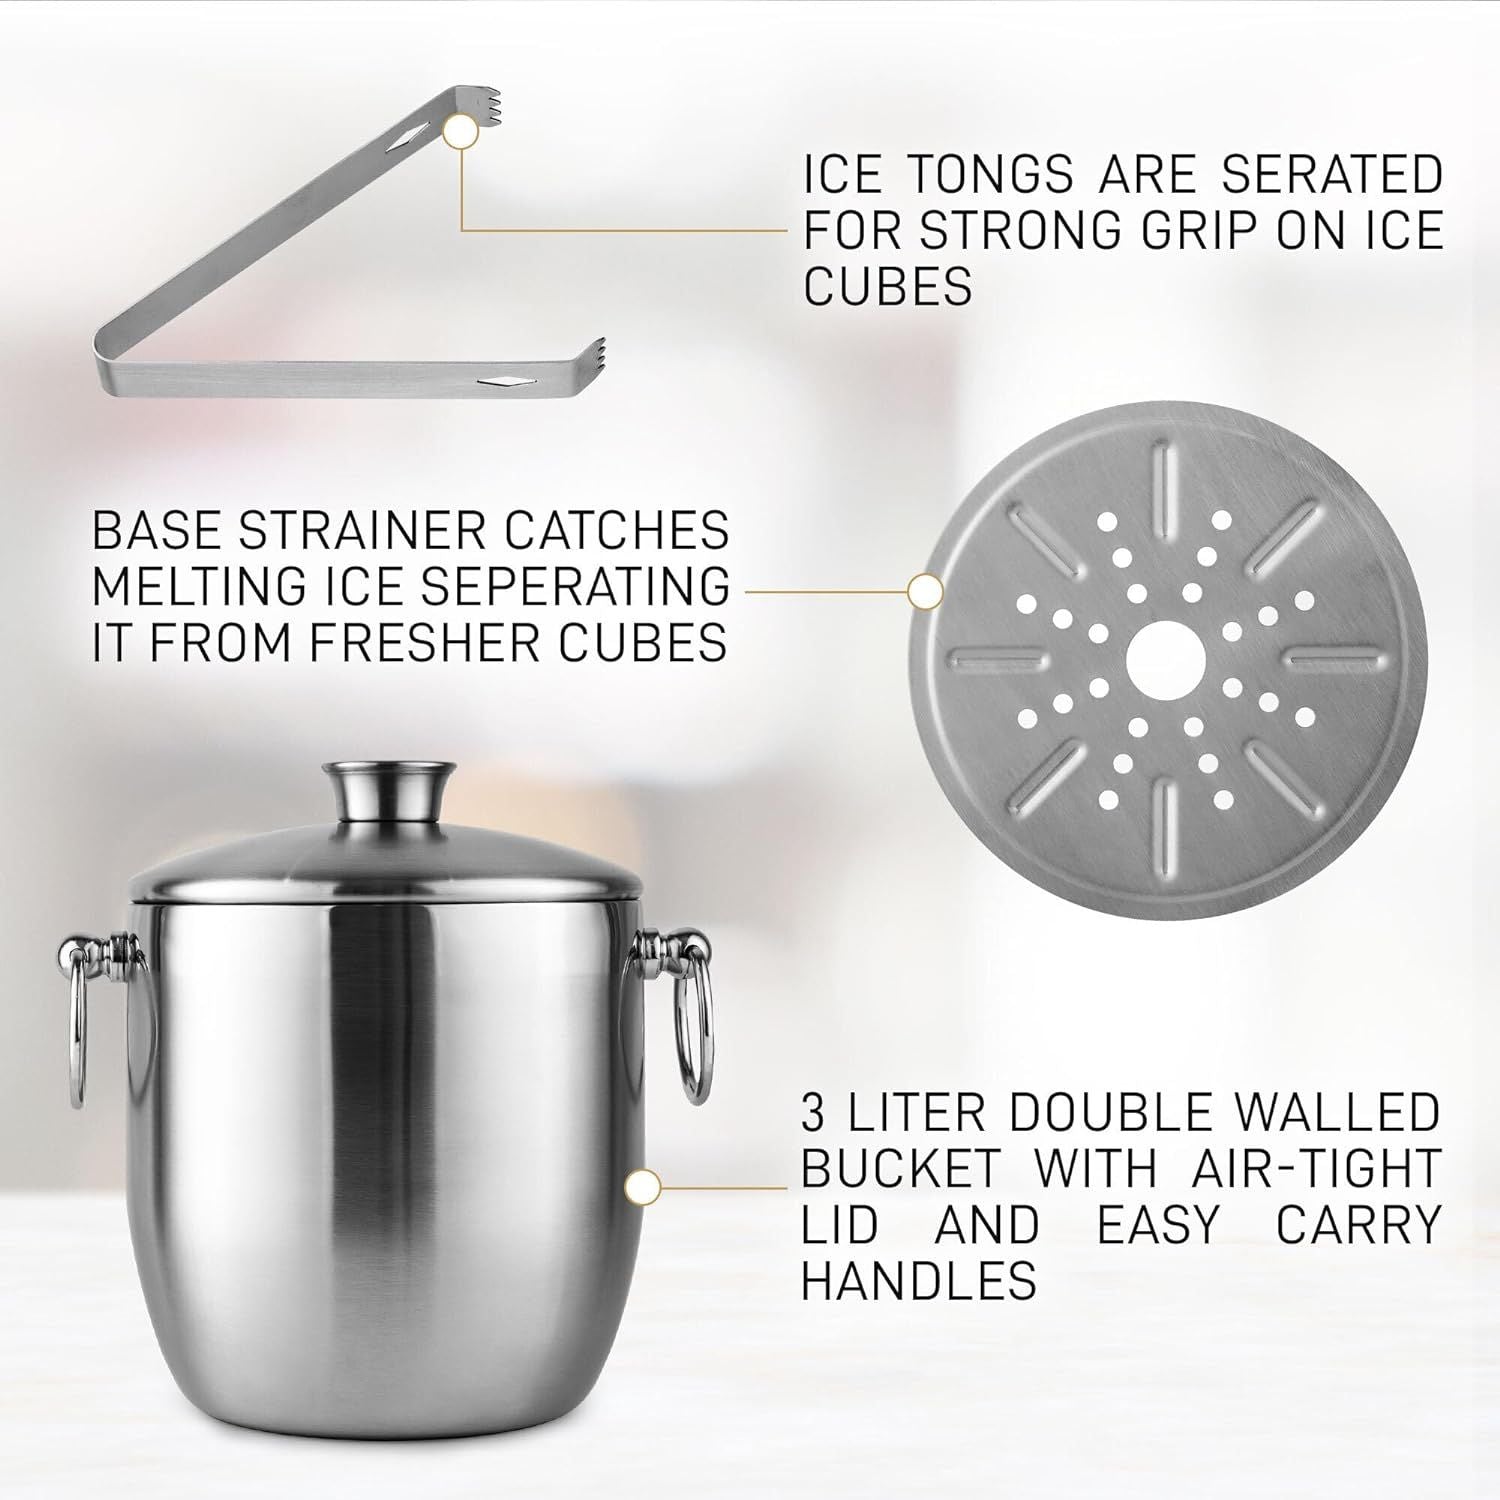 Ice Bucket With Lid, Strainer and Tongs